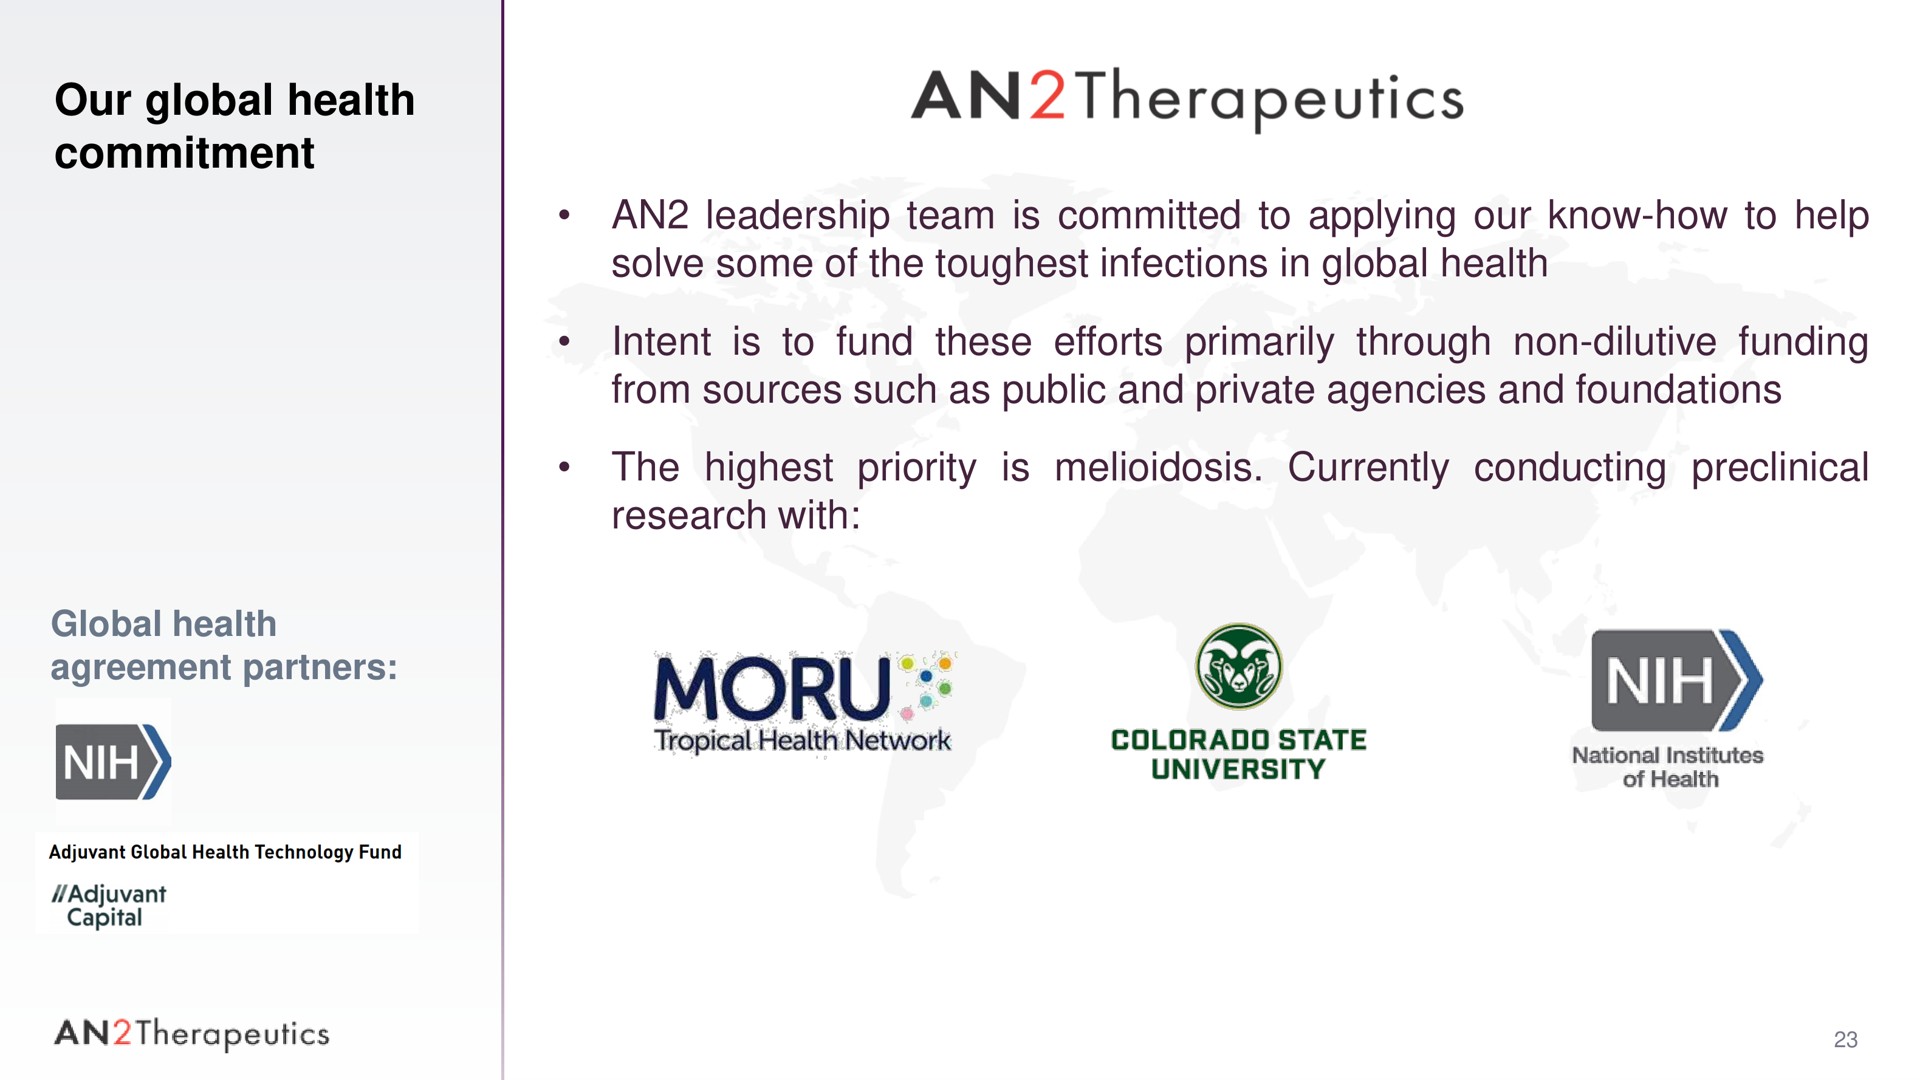 our global health commitment global health agreement partners an leadership team is committed to applying our know how to help solve some of the infections in global health intent is to fund these efforts primarily through non dilutive funding from sources such as public and private agencies and foundations the highest priority is currently conducting preclinical research with an university an therapeutics | AN2 Therapeutics